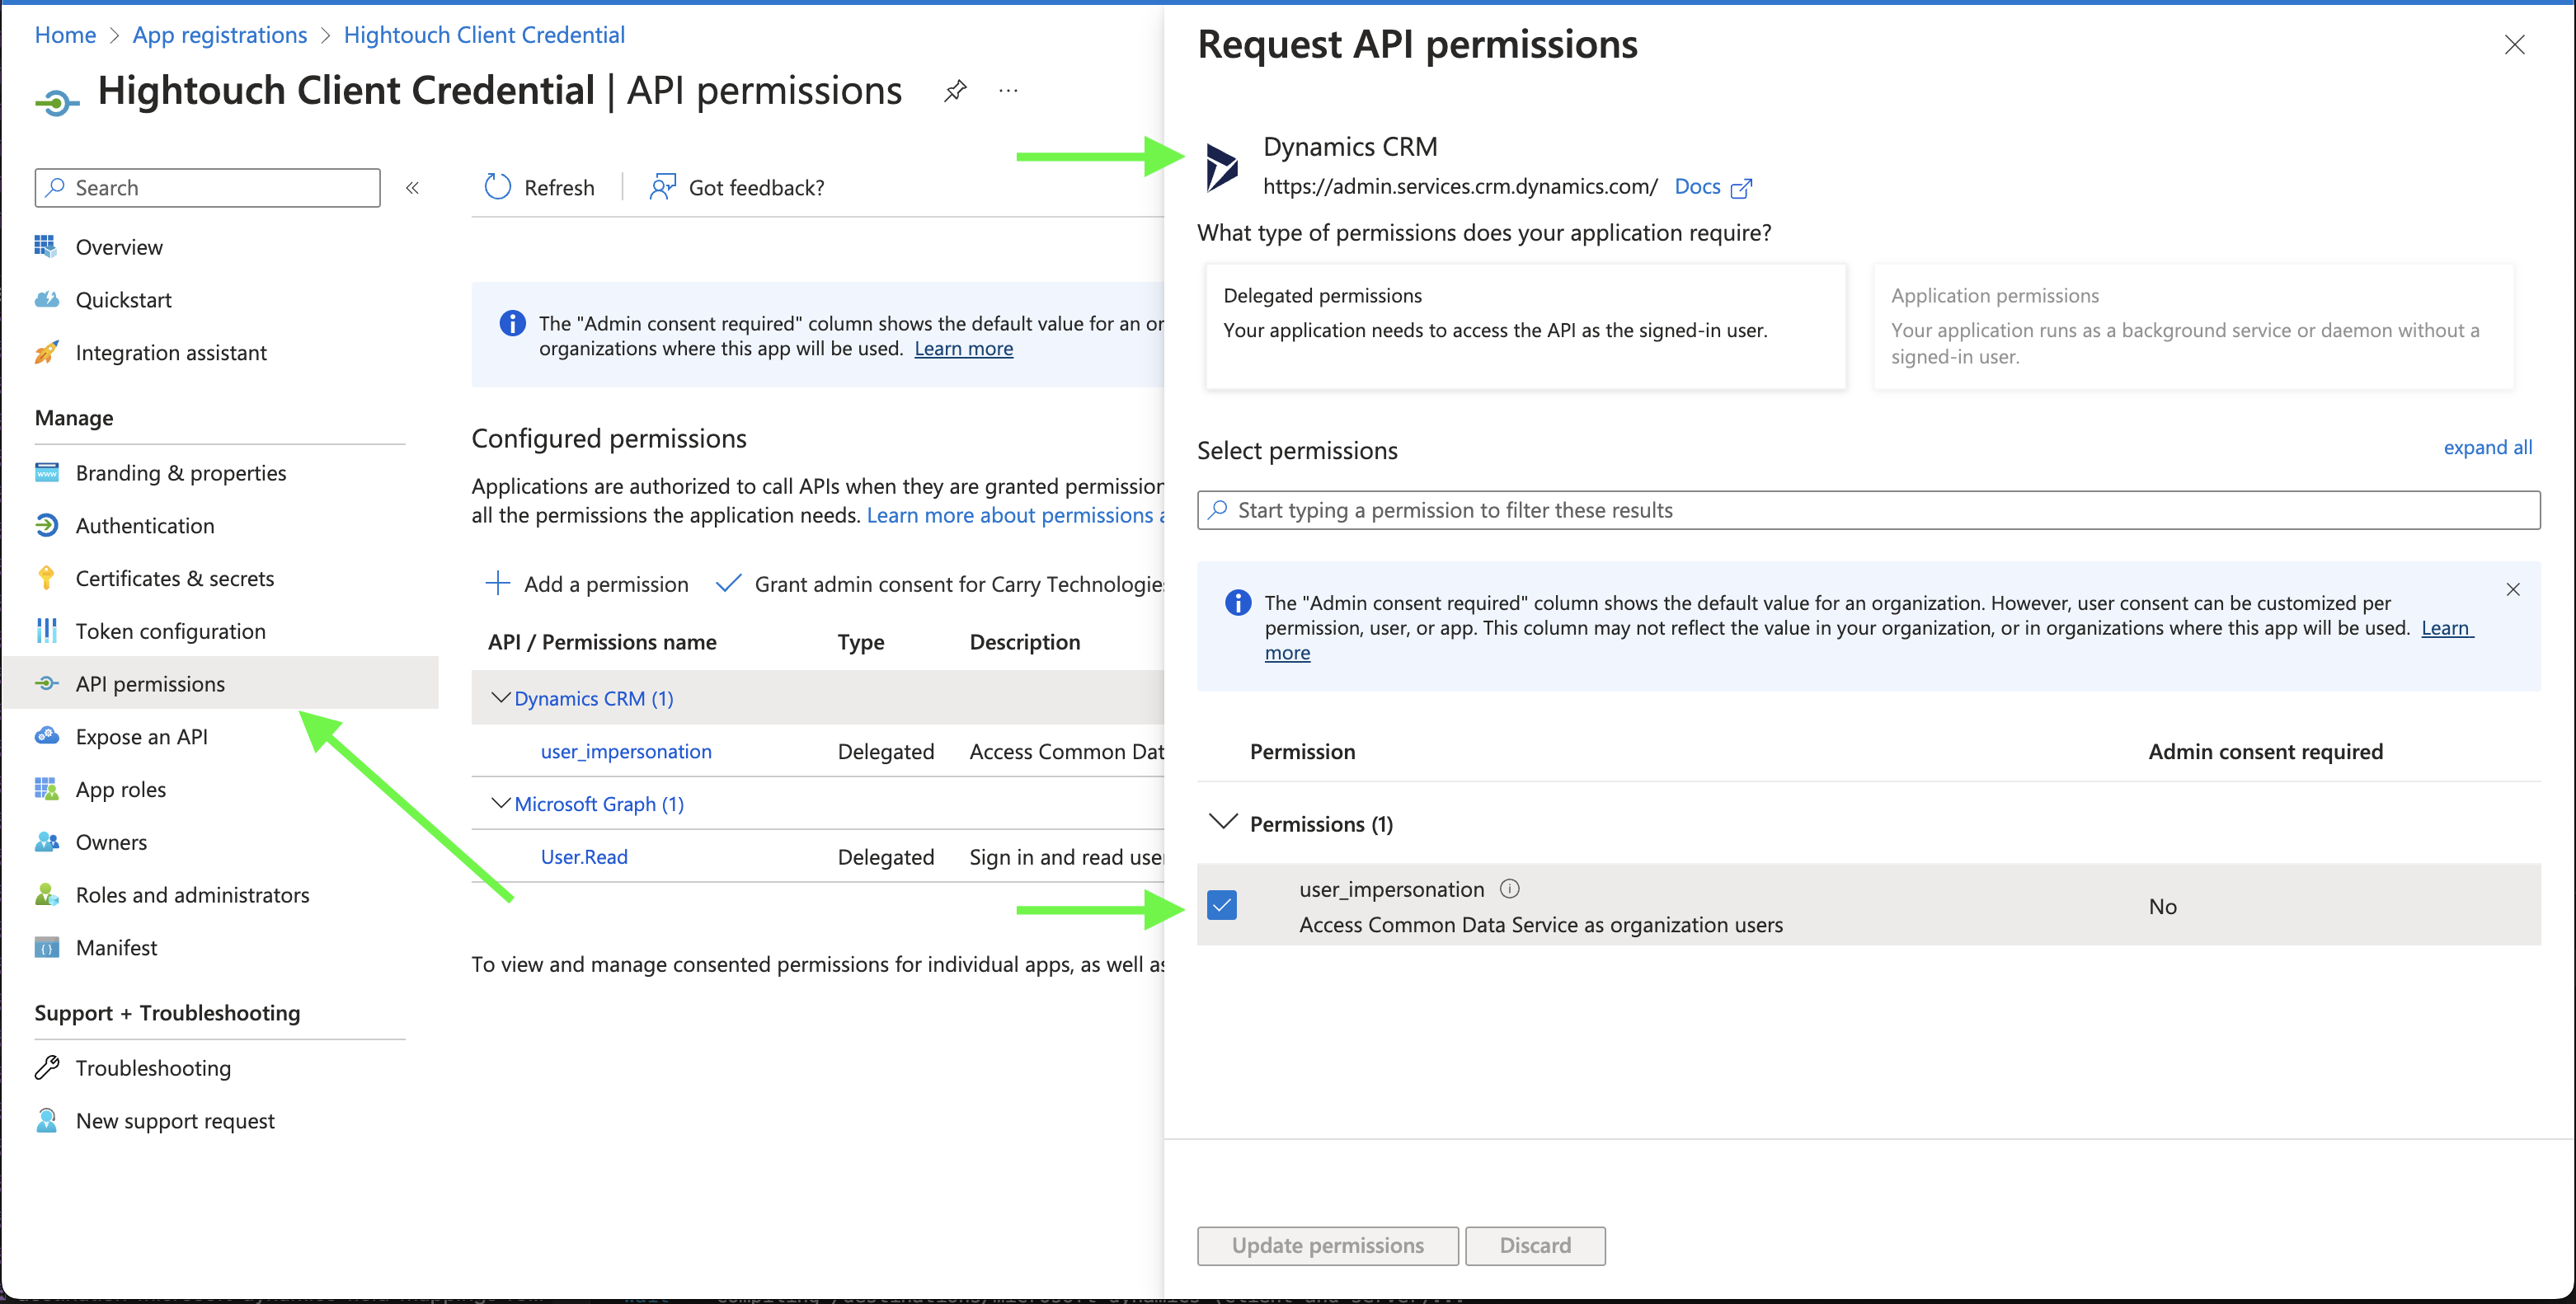 Grant the required permissions